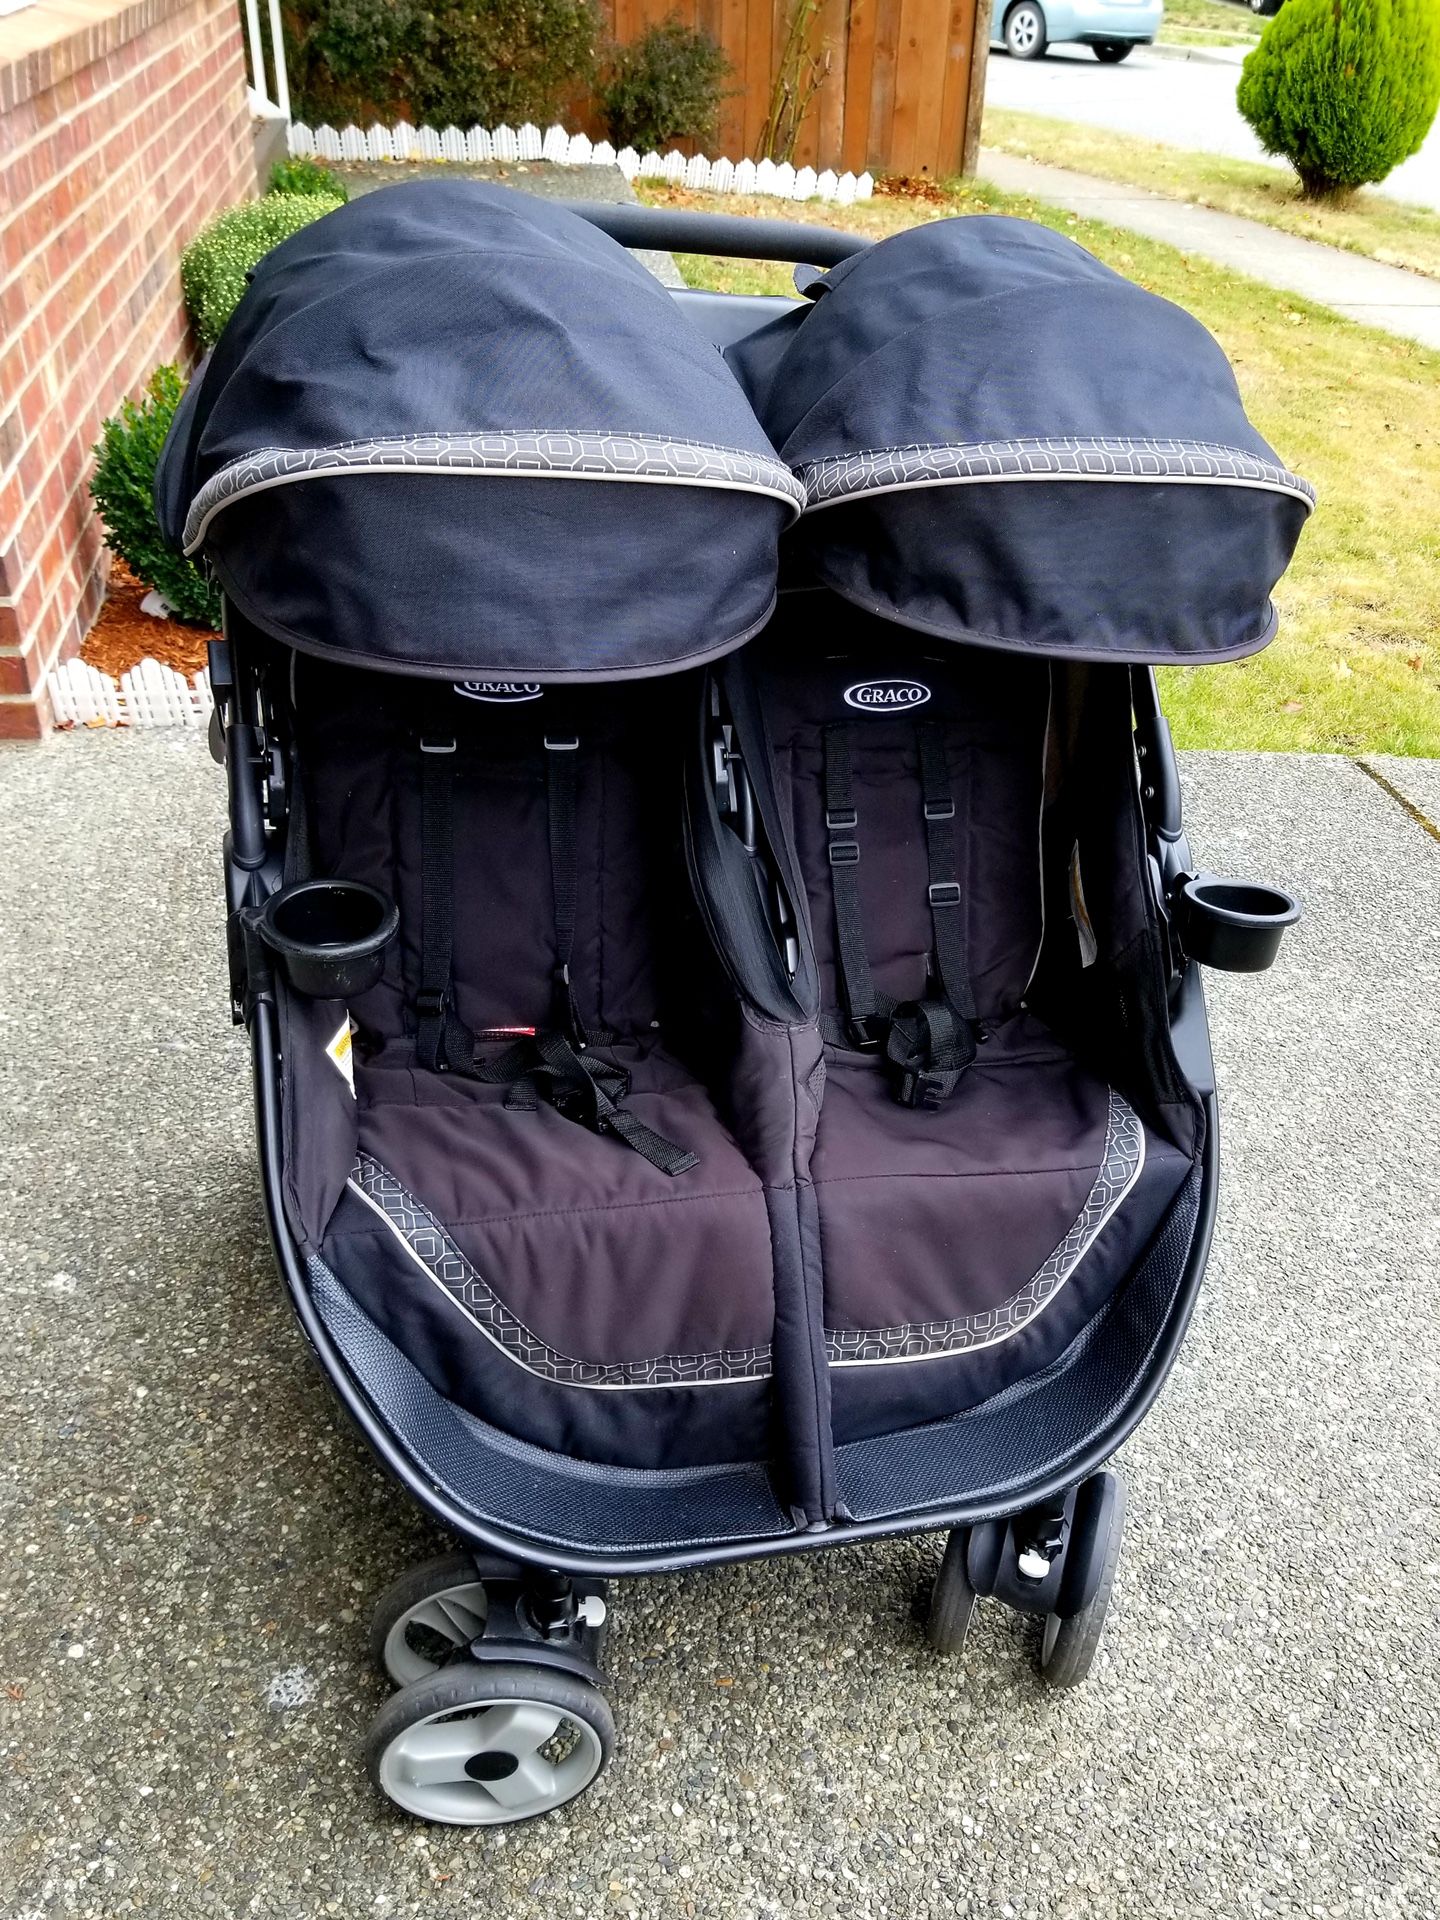 Graco FastAction Fold Duo Click Connect stroller